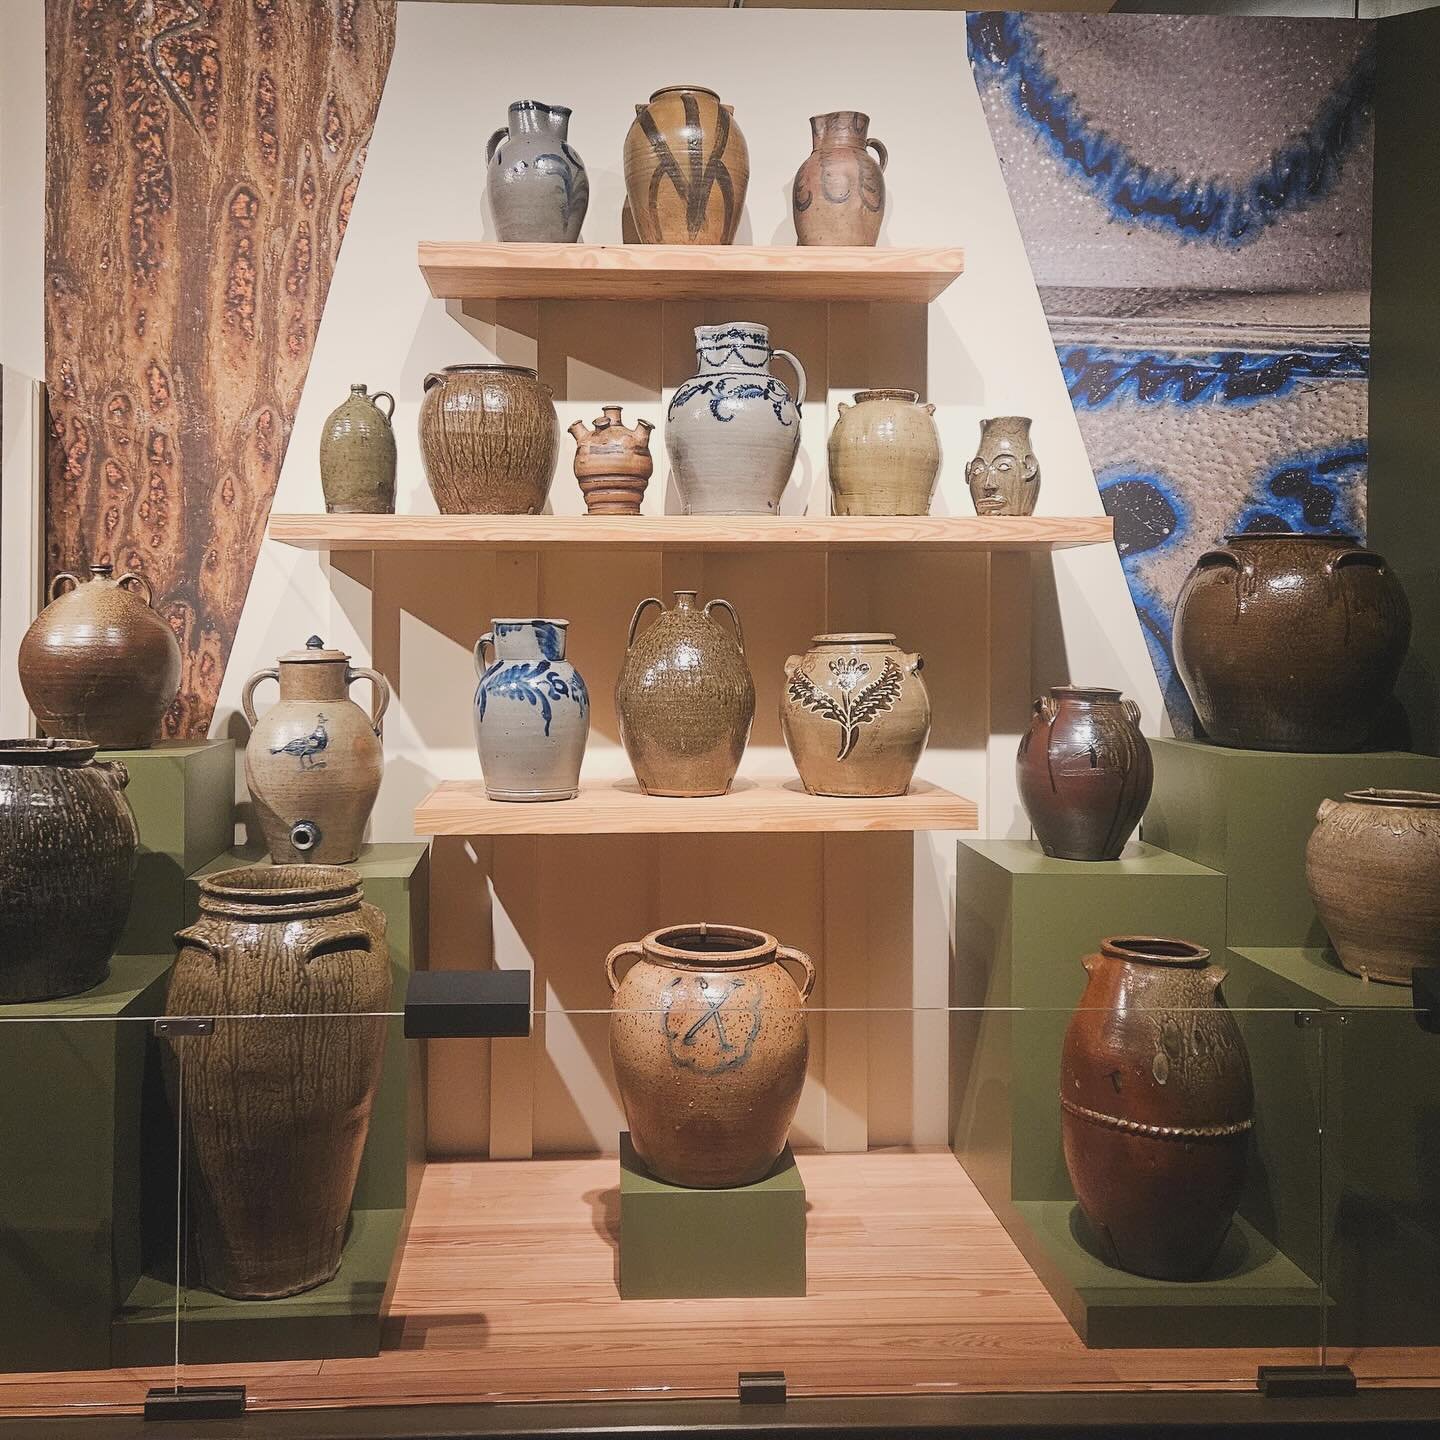 Majestic Scenic fabricated cantilevered shelves for the William C. &amp; Susan S. Mariner Southern Ceramics Gallery, Old Salem in North Carolina. The Mariners collection features incredible Southern pottery now on display for the public to enjoy at t